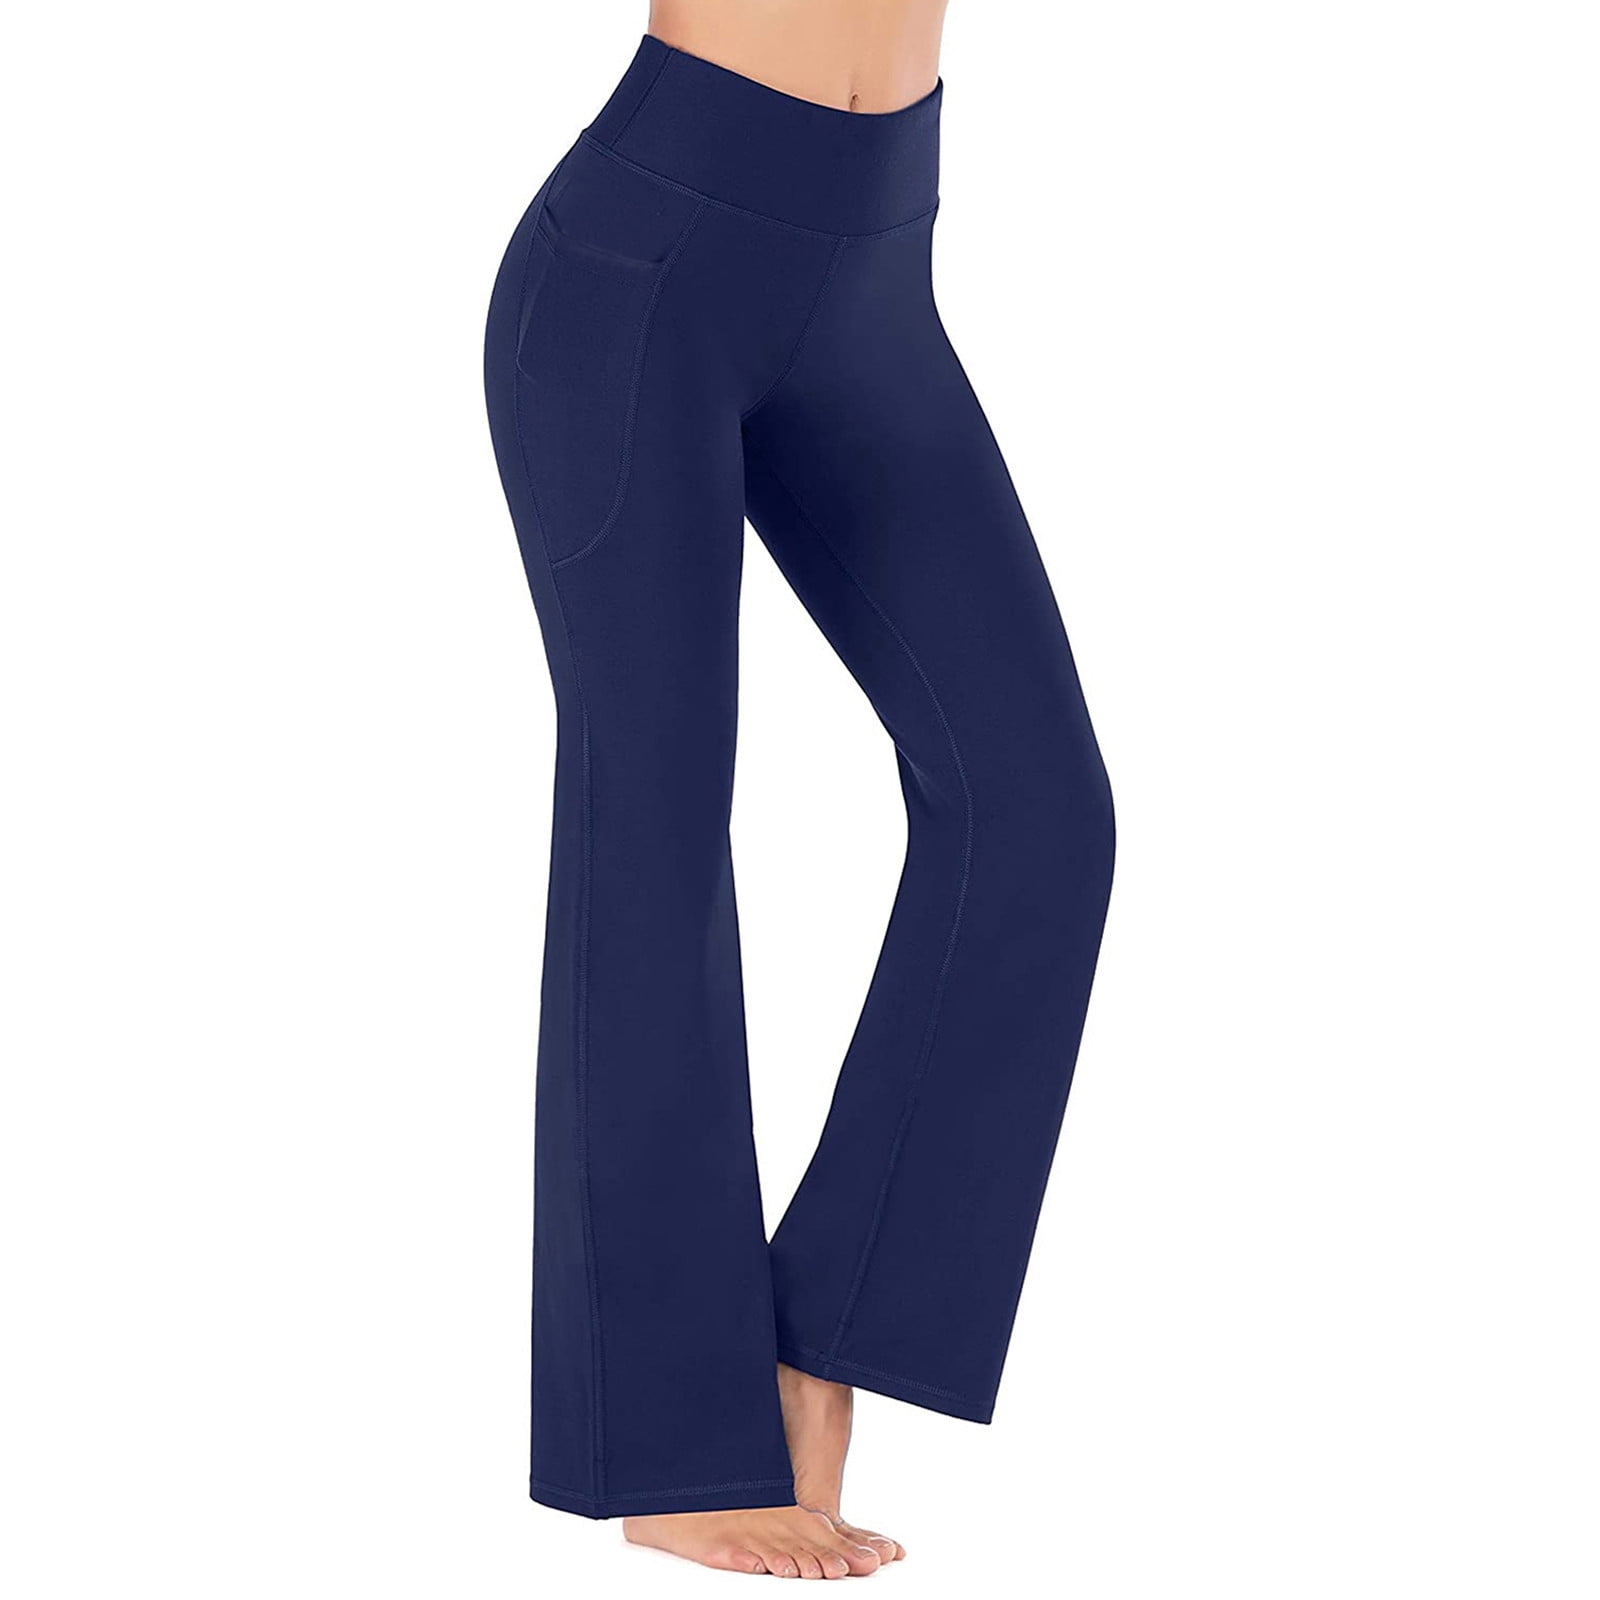  2 Piece Pants Outfits for Women,Women's Yoga Pants High Waist  Fake Two Pieces Trousers Running Workout Leggings Solid Color Elastic Sweat  Pants Coupons and Promo Codes for Discount Prime Only 